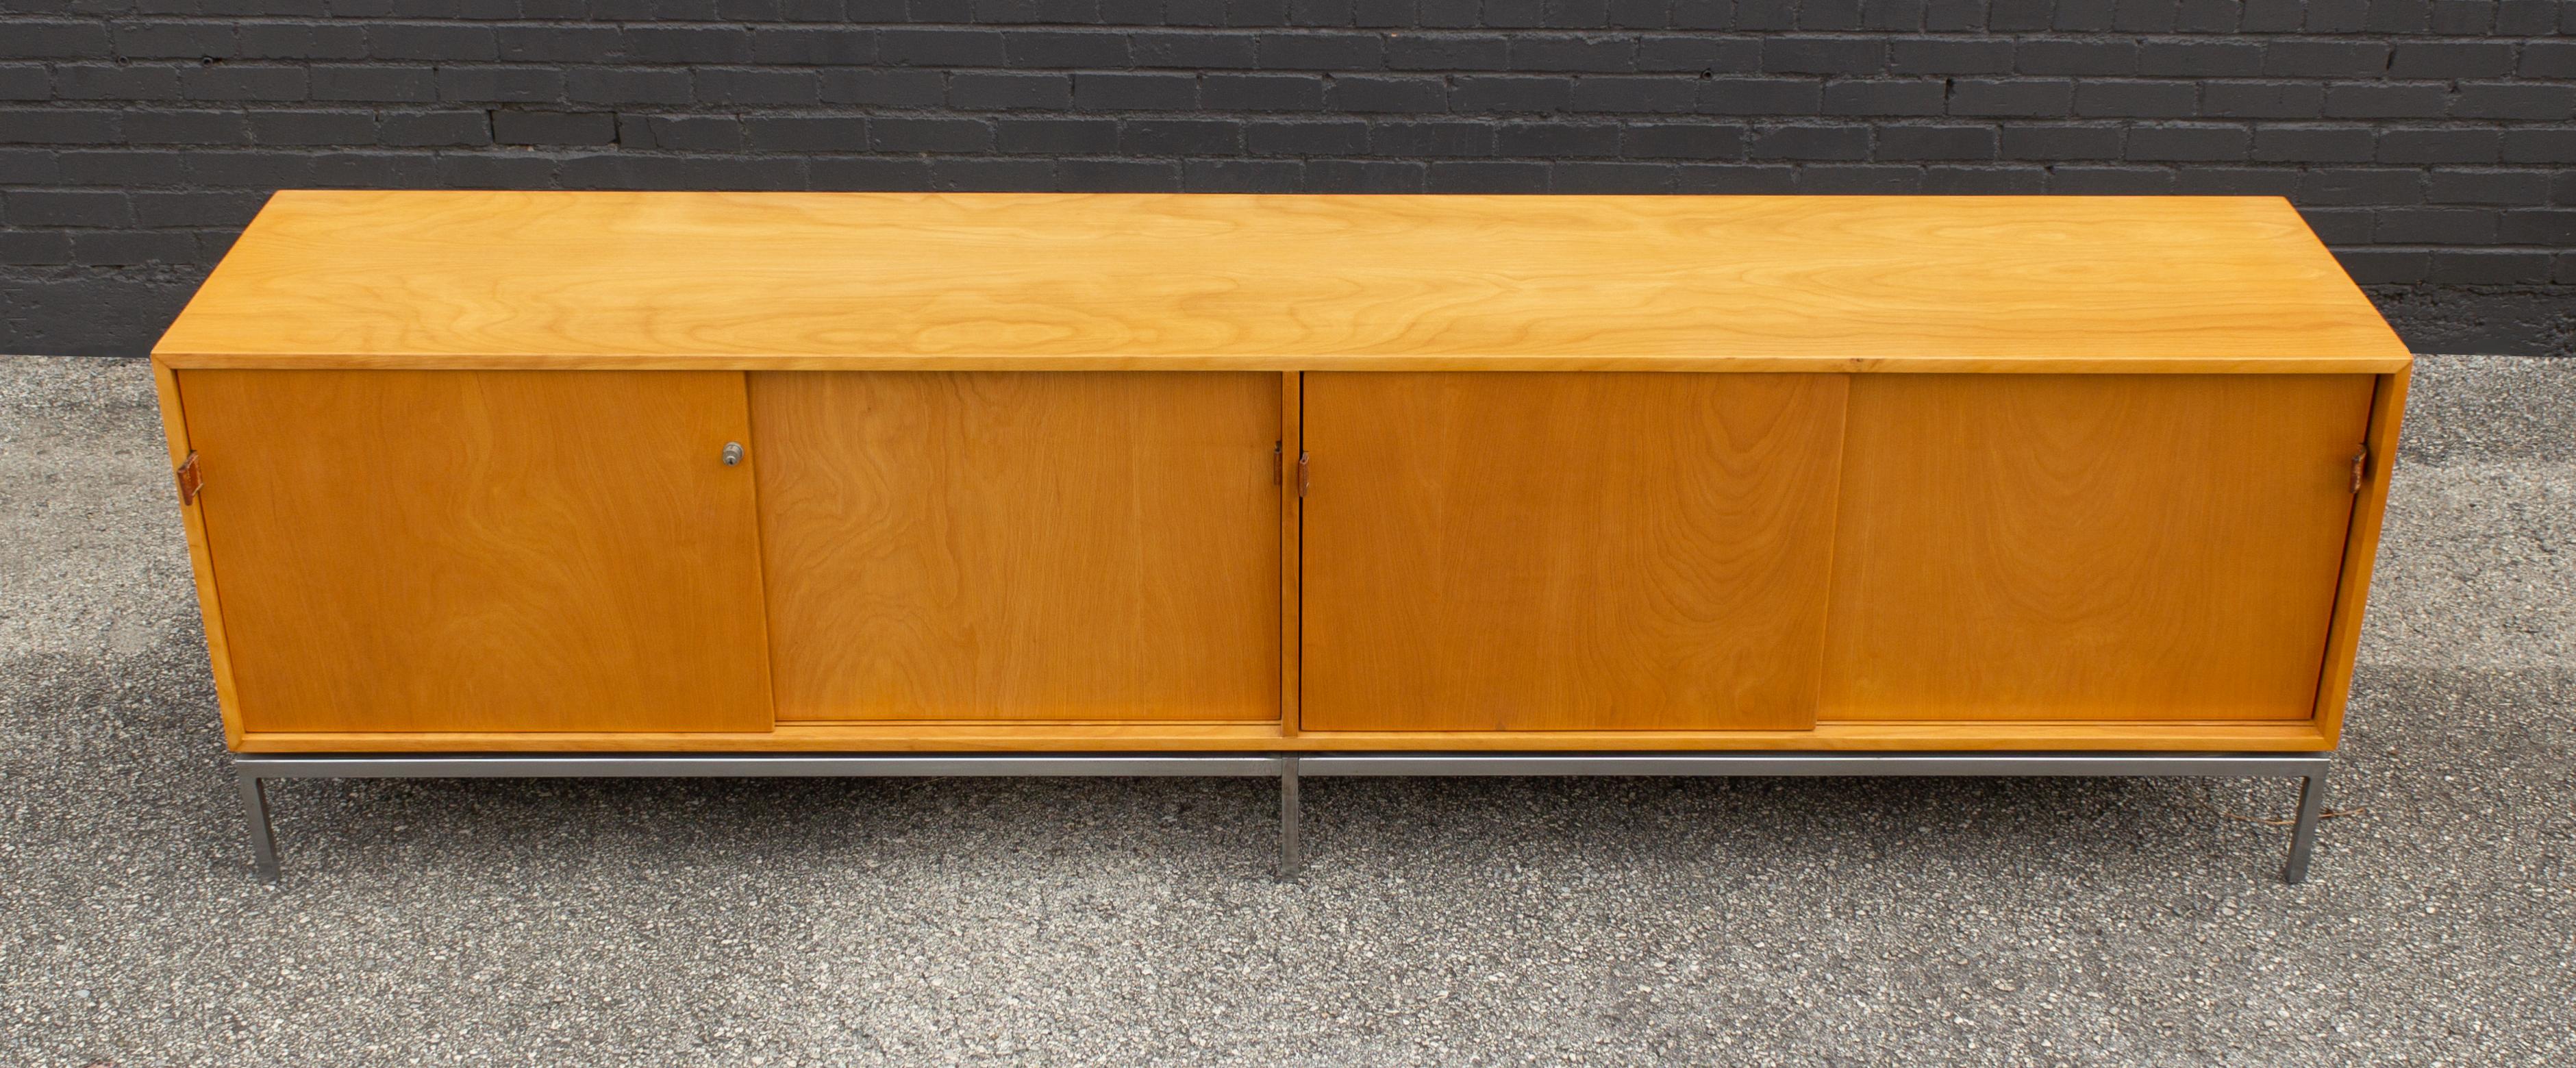 Mid-Century Modern Florence Knoll Maple Credenza with Leather Pulls and Oak Drawers Early 1950s For Sale